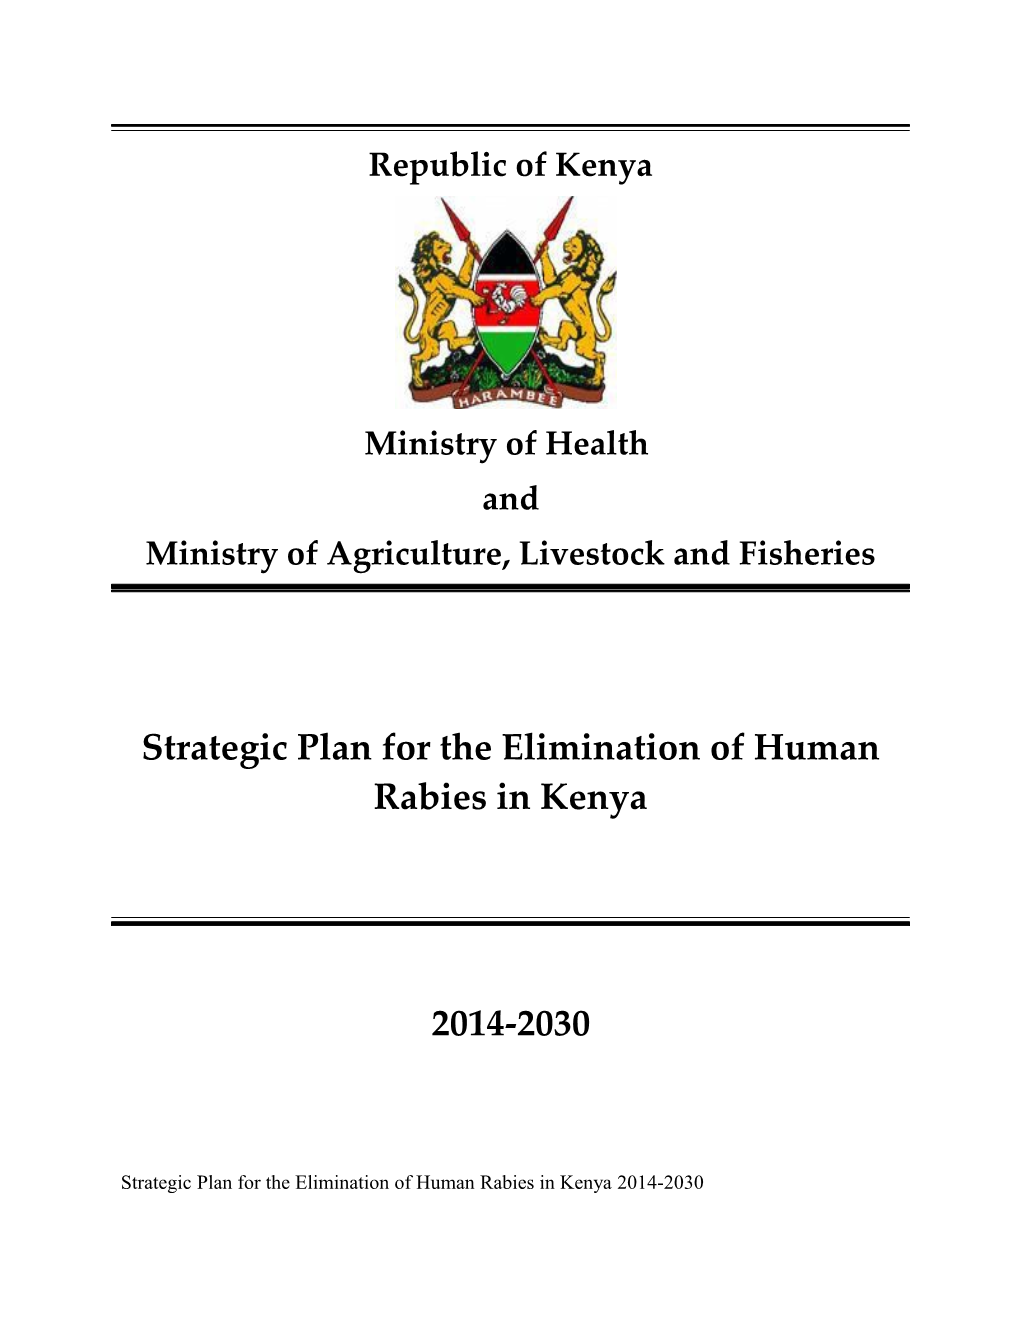 Ministry Agriculture, Livestock and Fisheries